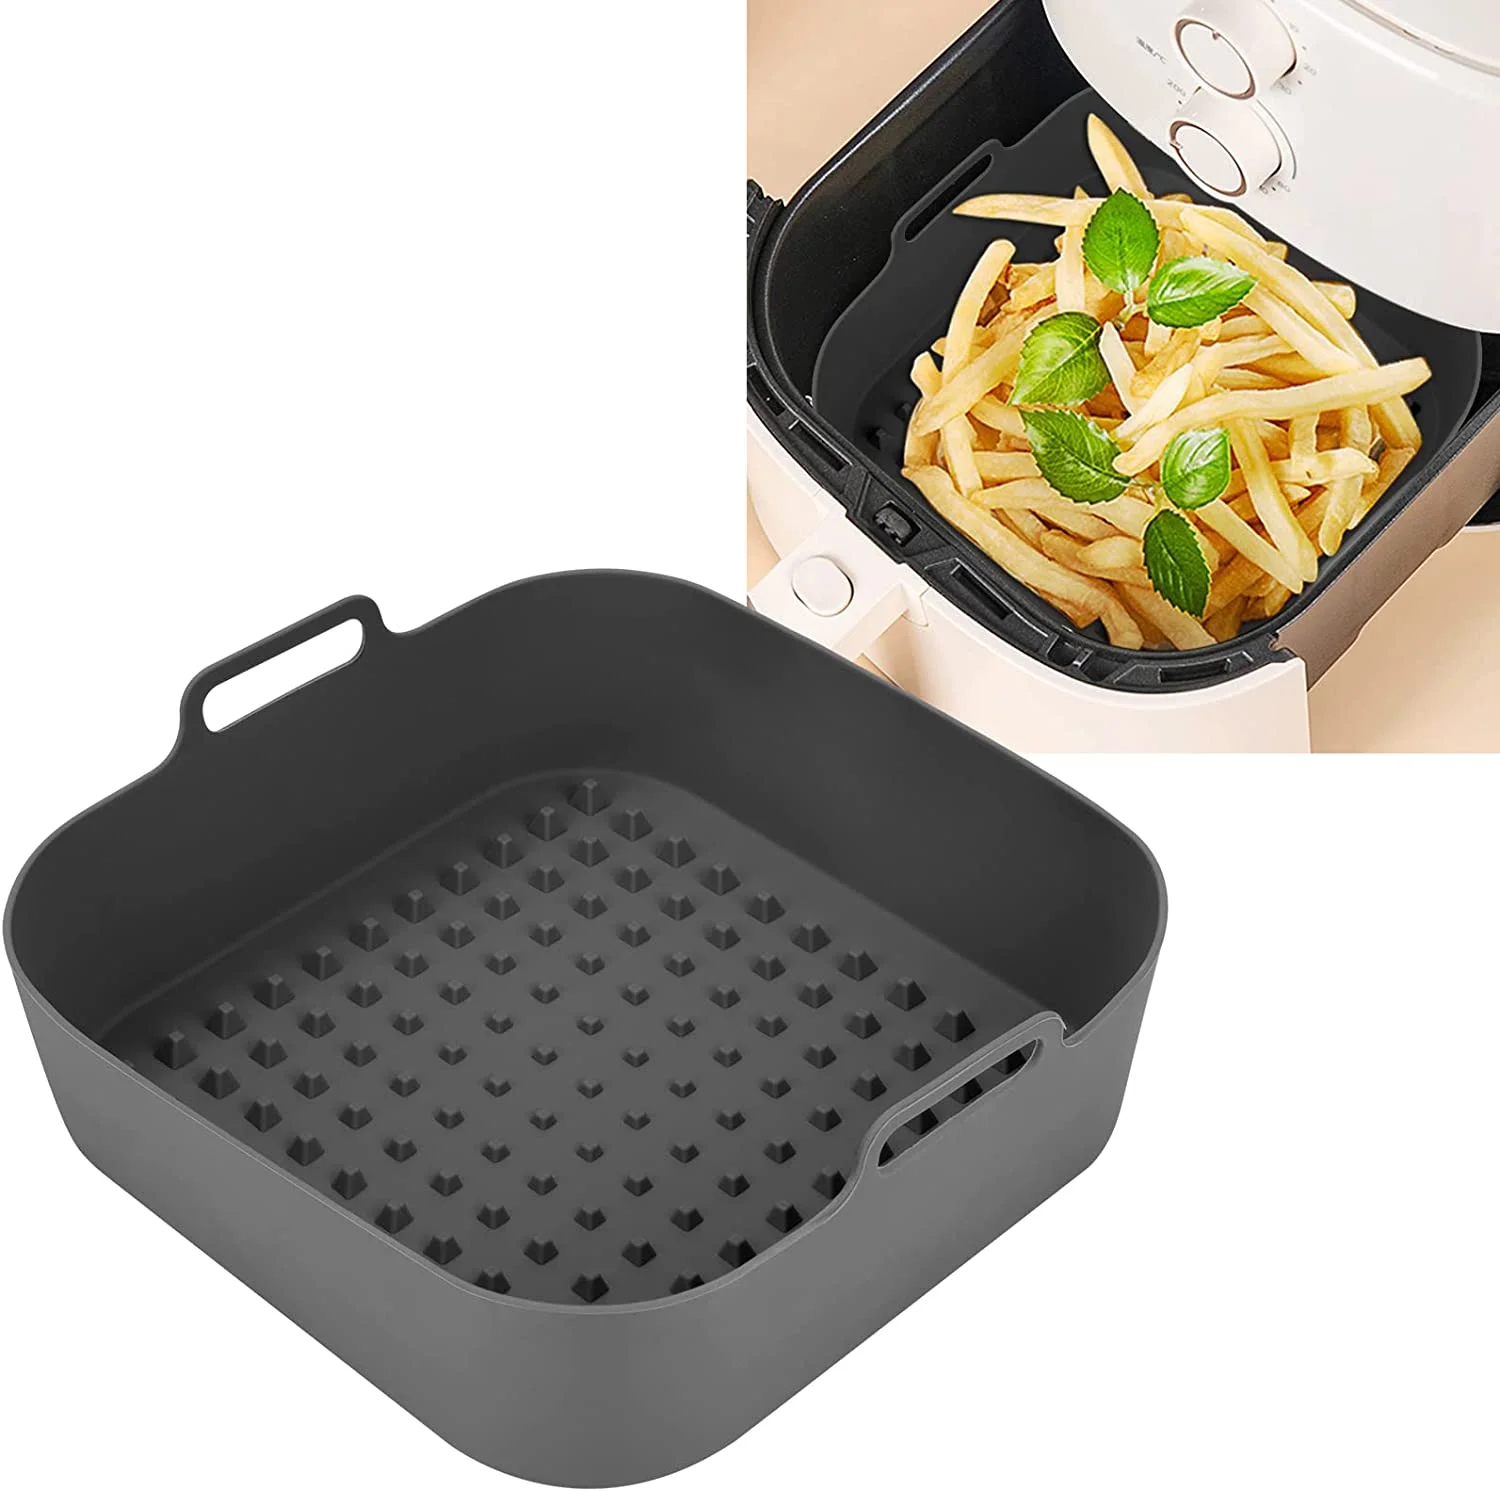 https://ae01.alicdn.com/kf/S850173789574413eb031ab9634ee718ao/Air-Fryer-Silicone-Pot-Thick-Reusable-Silicone-Square-Air-Fryer-Liners-Replacement-of-Parchment-Liner-Paper.png